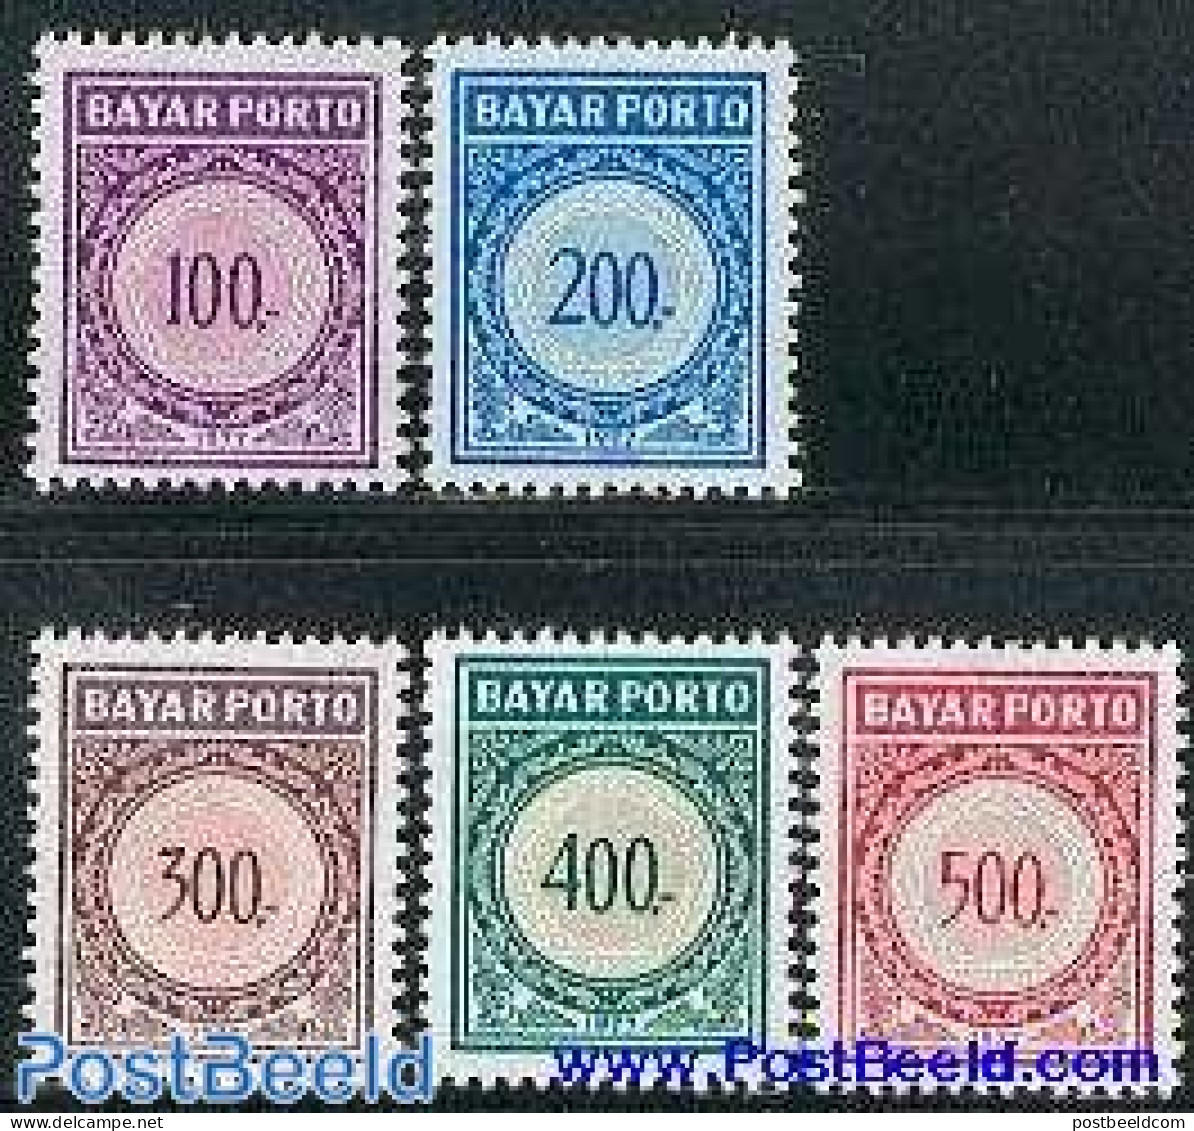 Indonesia 1977 Postage Due 5v, Mint NH - Indonesia